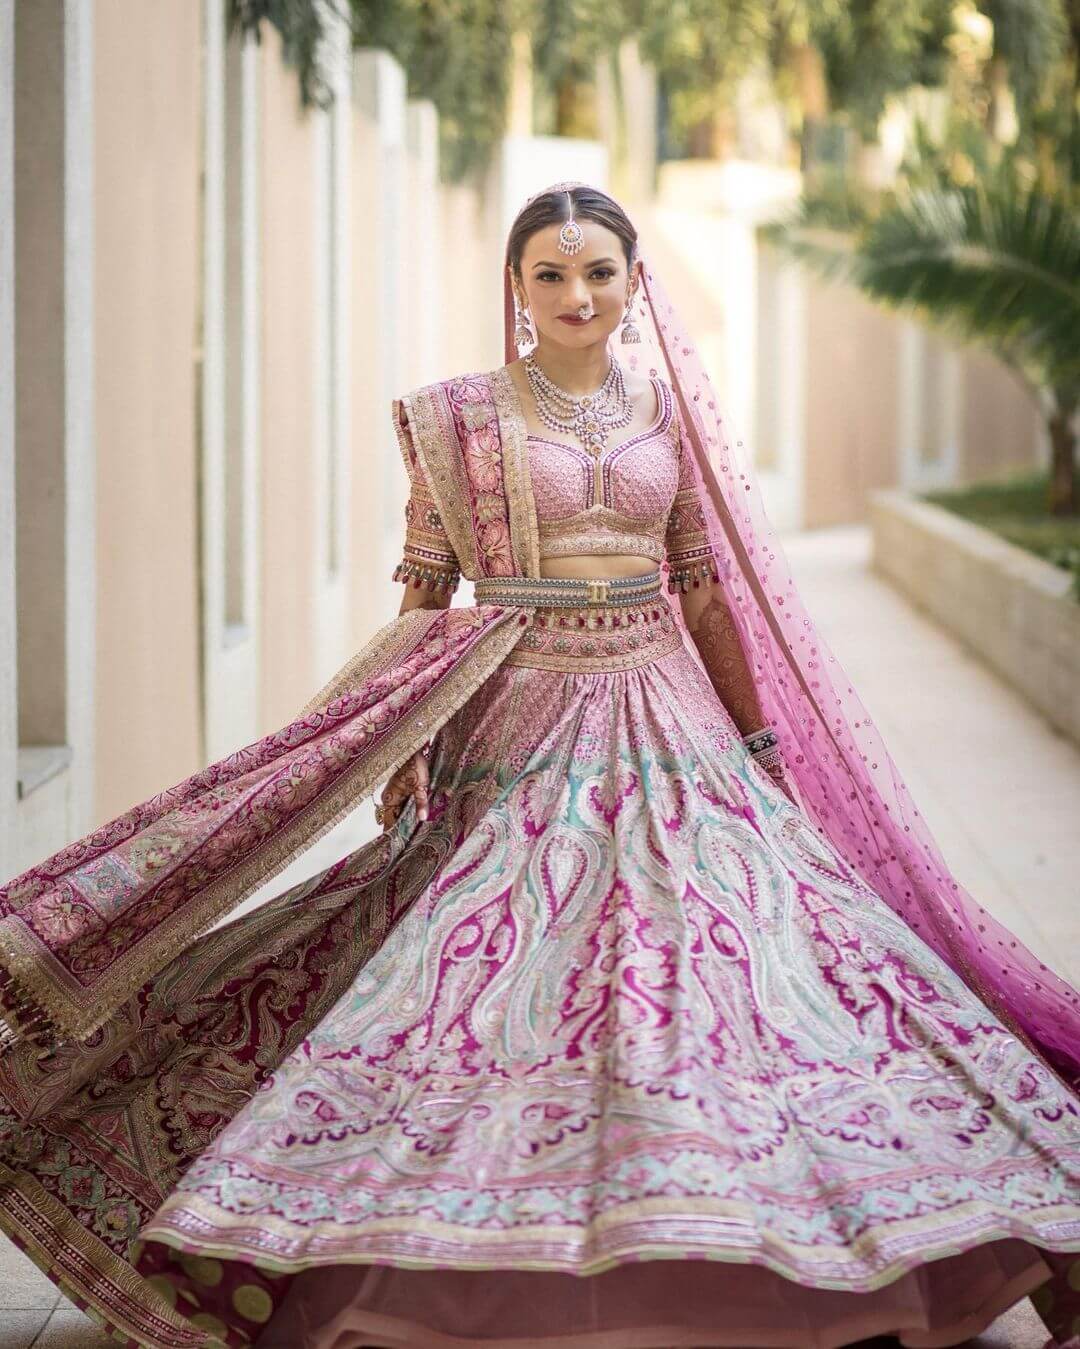 The Rose-Pink Shade Of the Lehenga Shades Of Bridal Pink Lehenga For Her Wedding Day